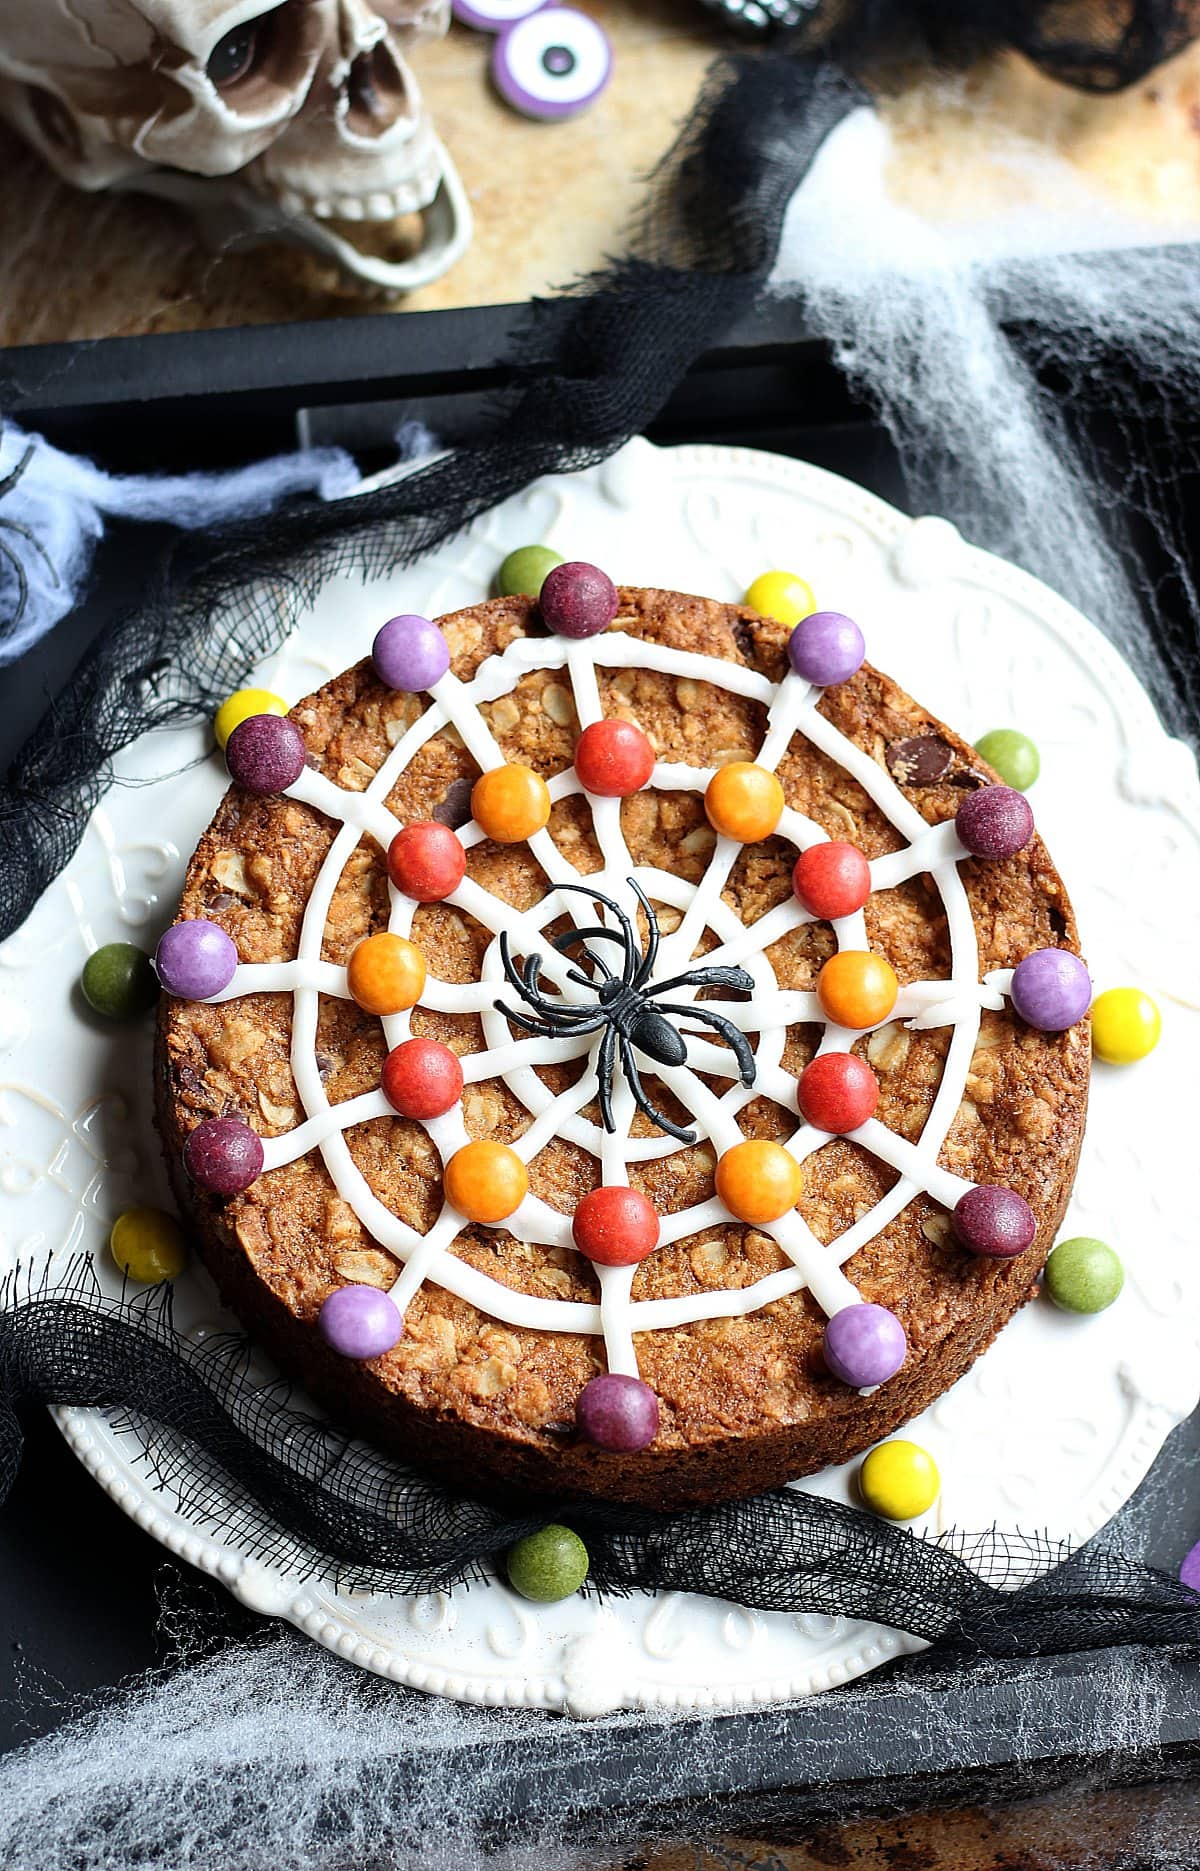 Halloween cookie cake decorated with spider web icing and candy